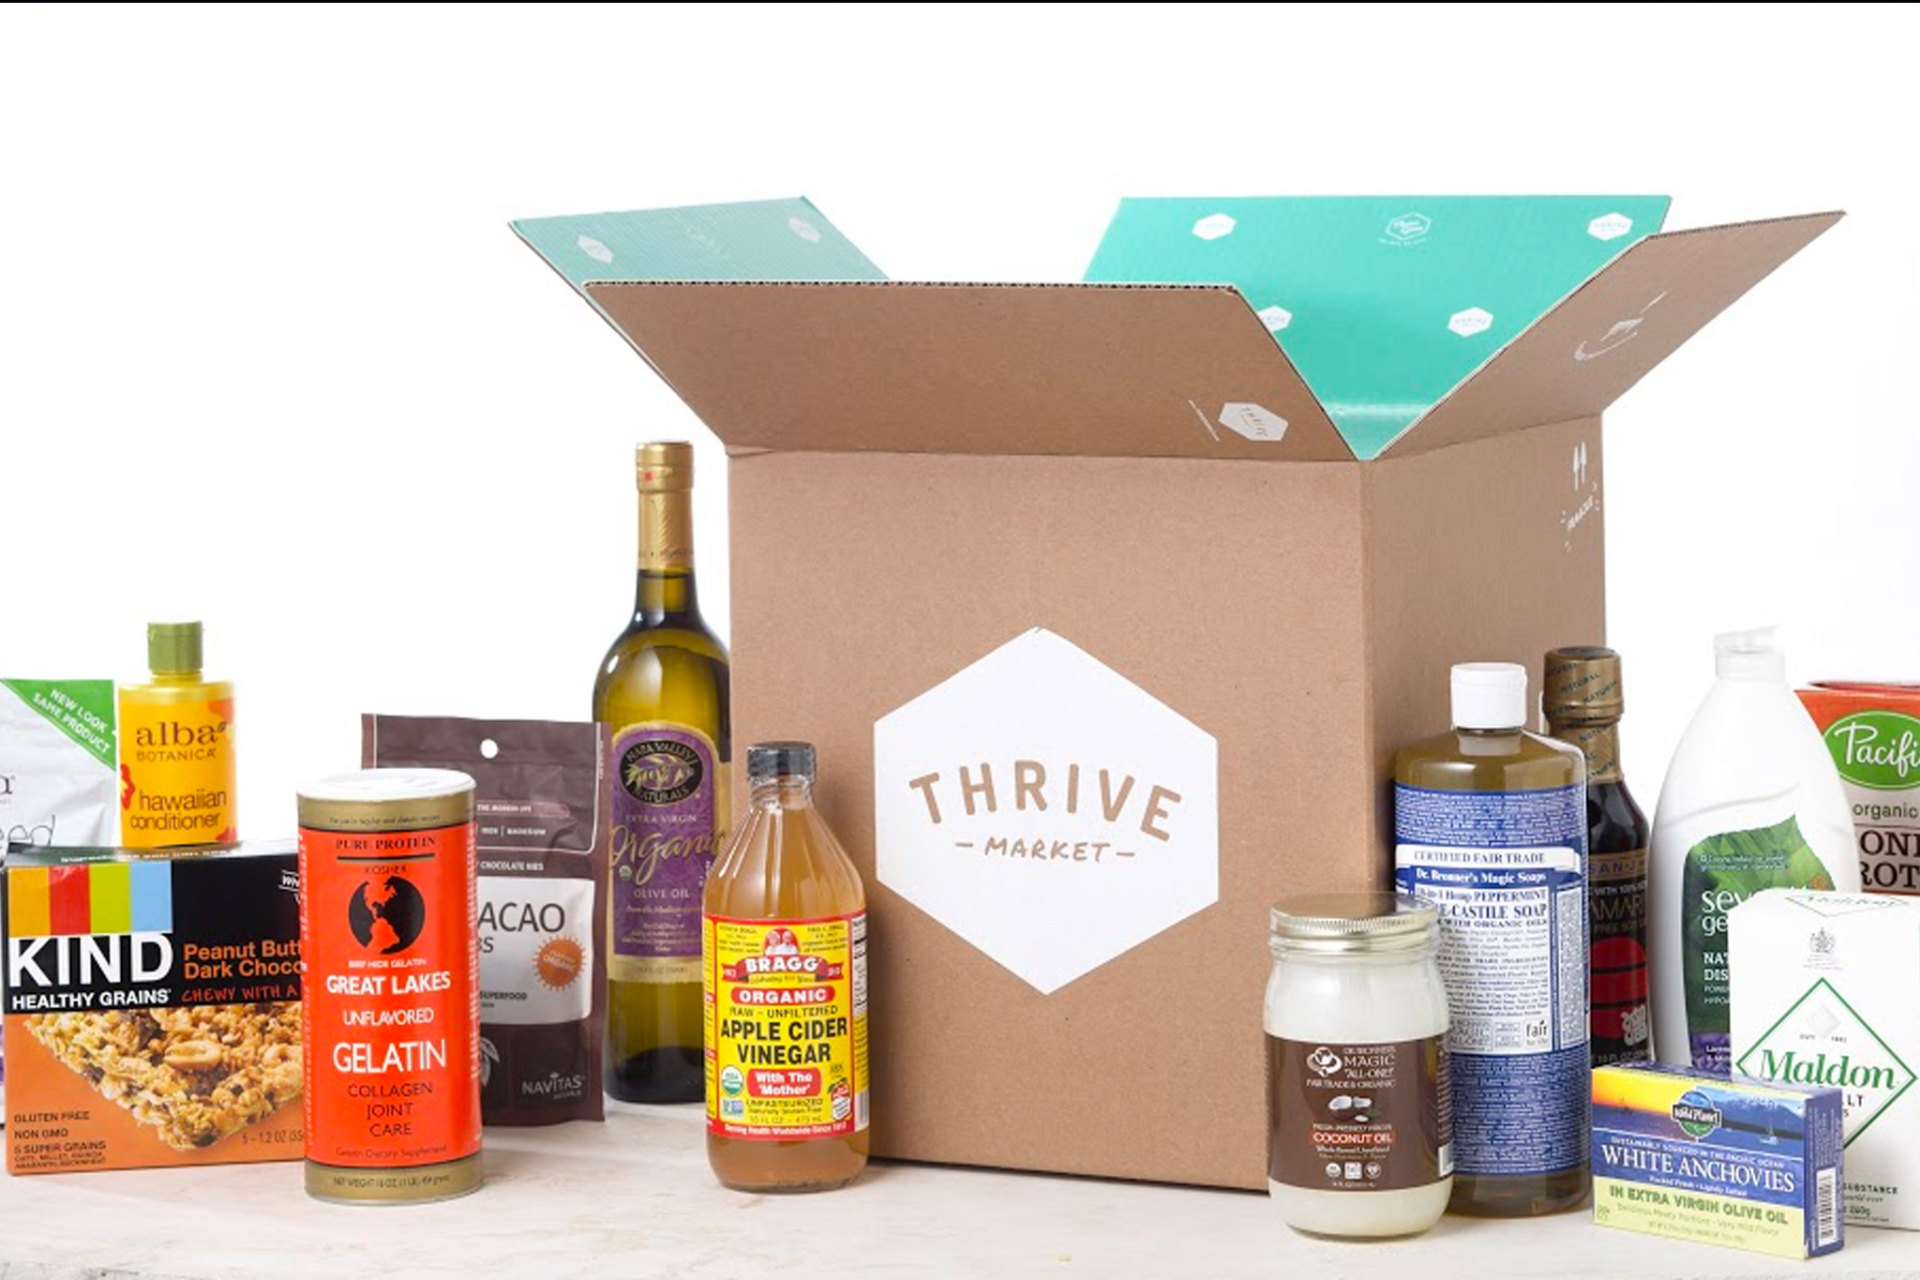 Thrive Market Teacher Discount | Education Discount on Groceries & Home Supplies from Thrive Market